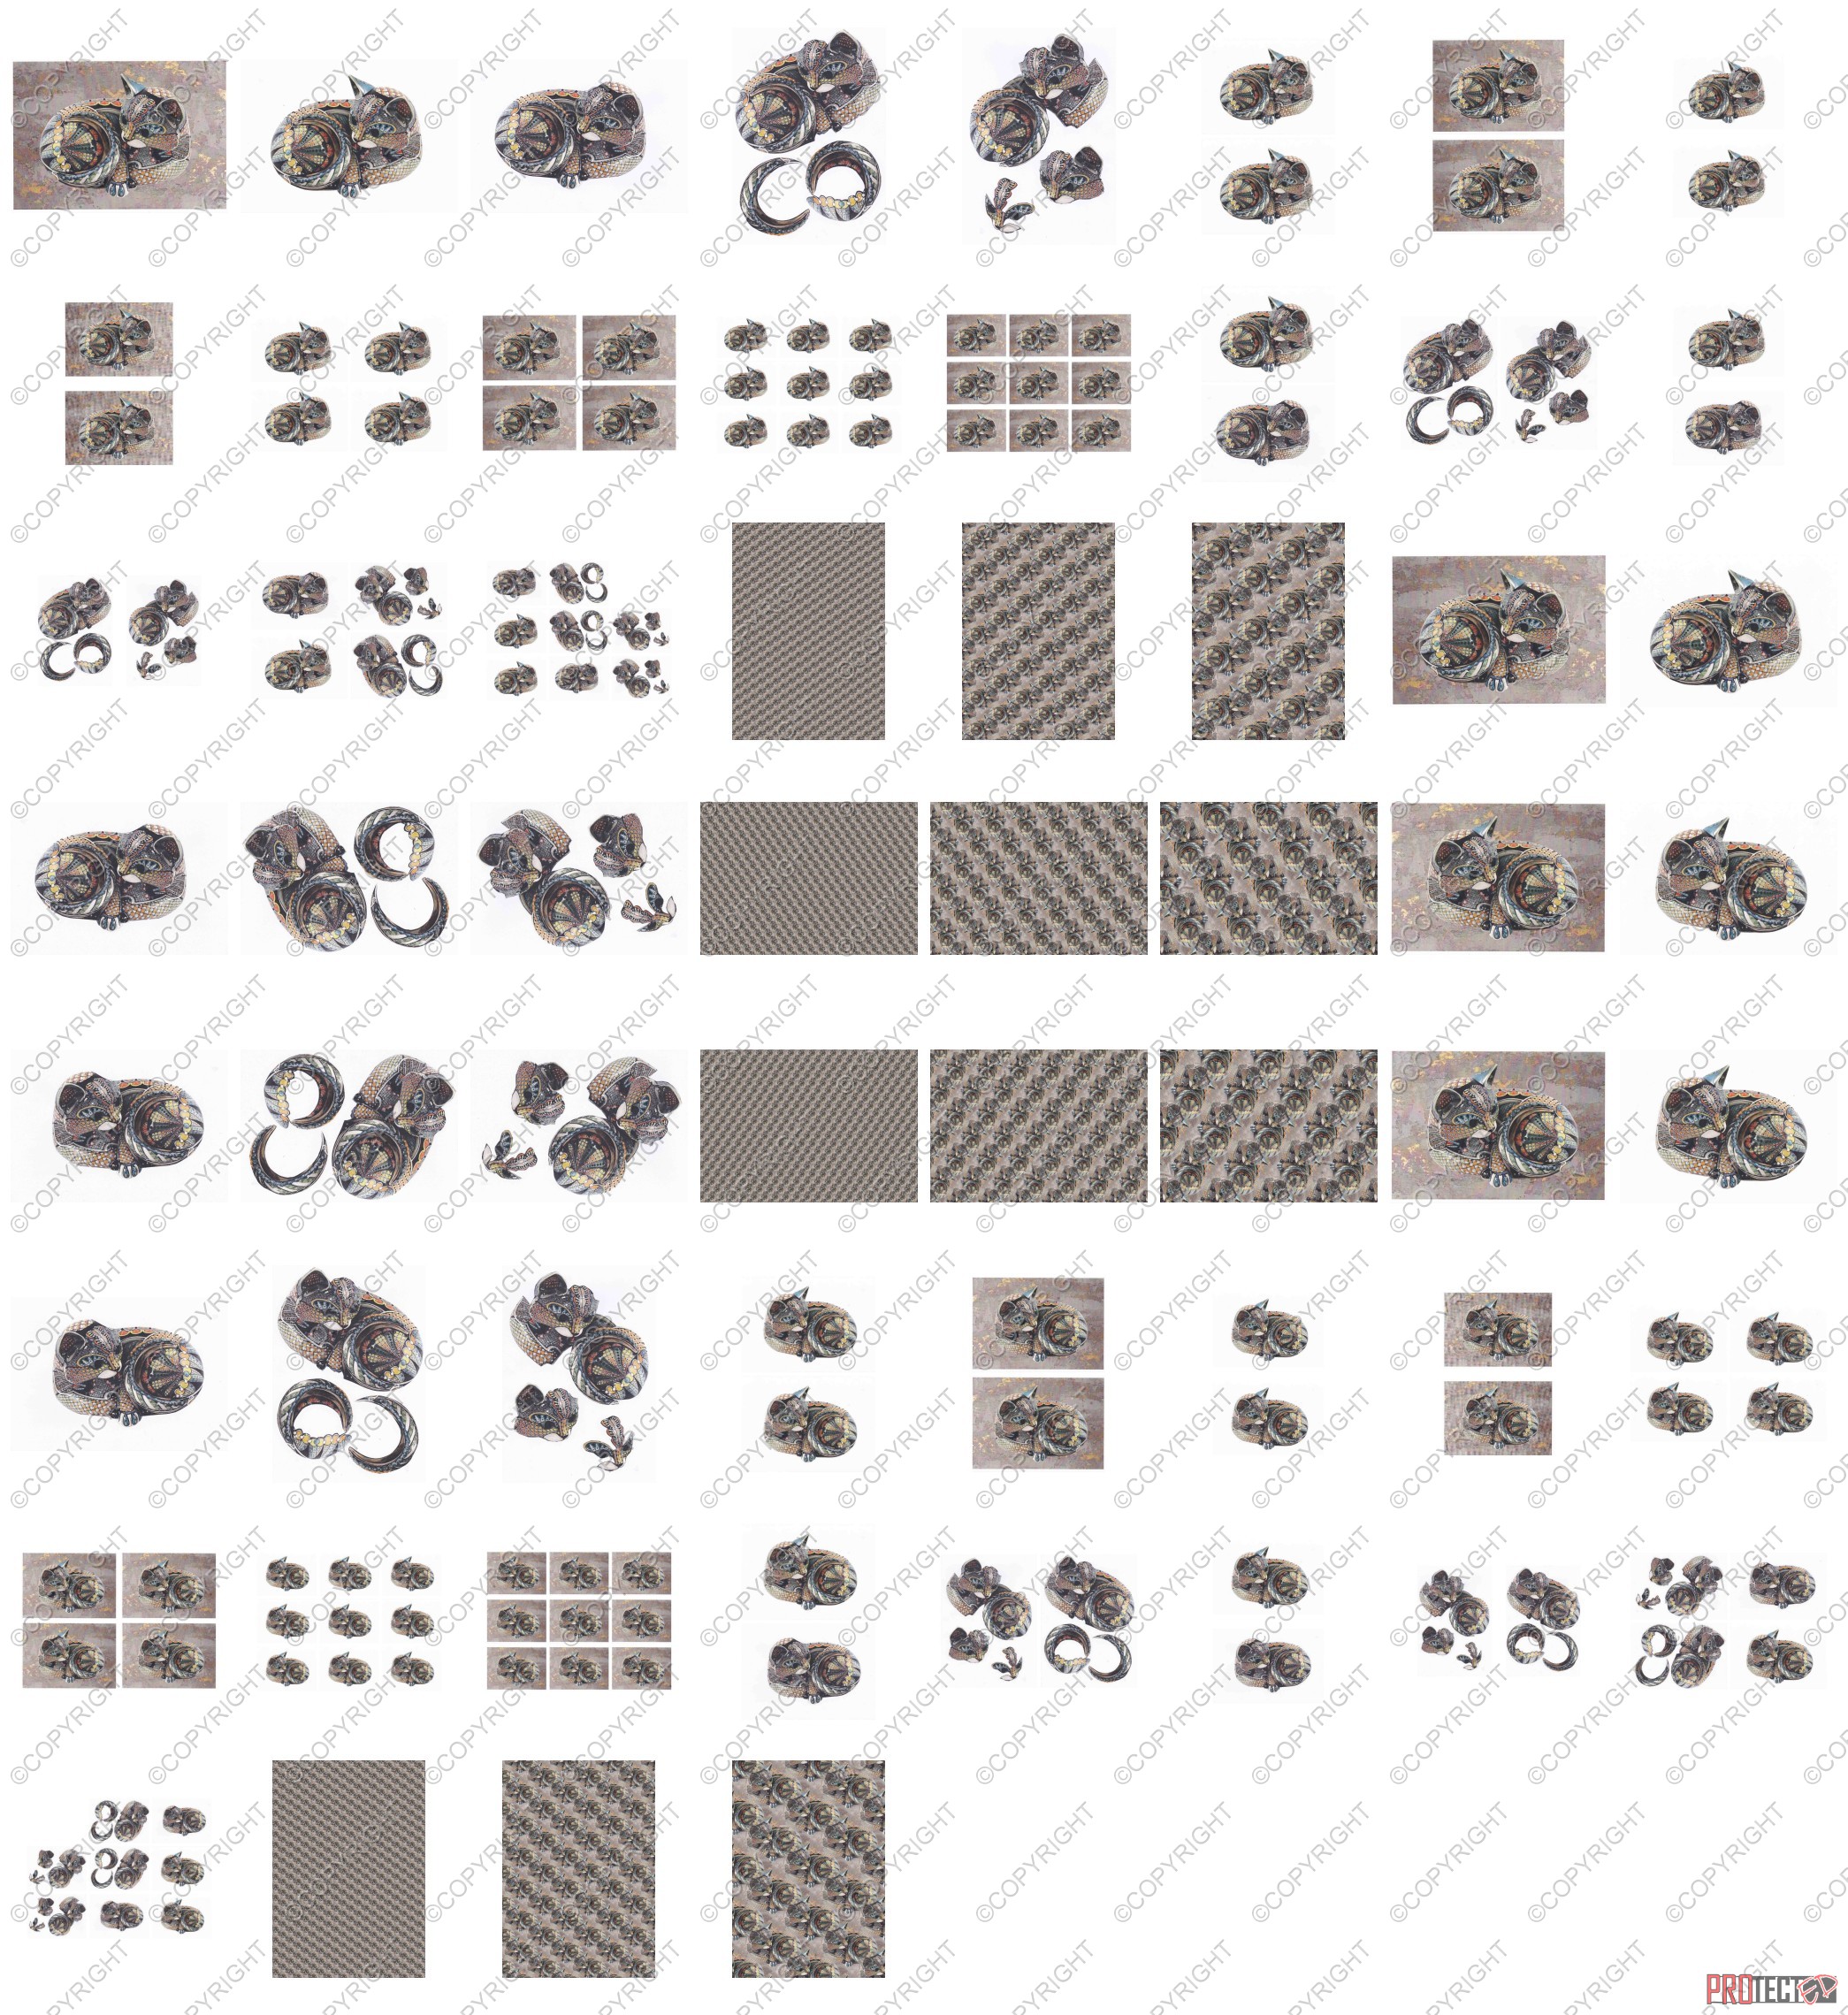 Ceramic Effect Cat Set 16 - 60 Pages to Download